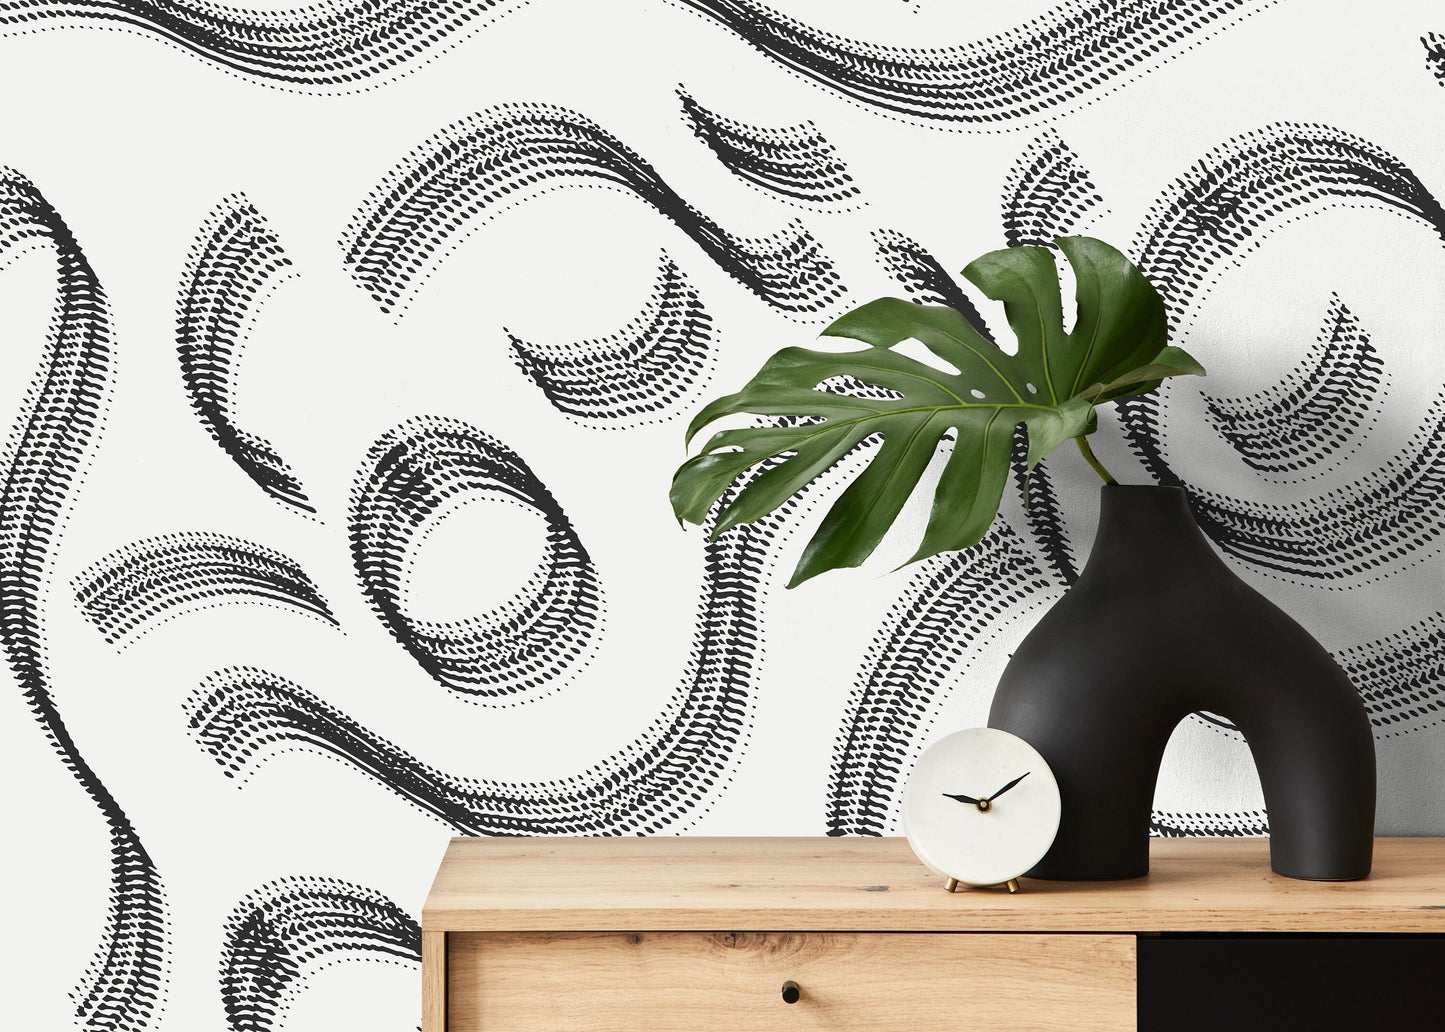 Wallpaper Peel and Stick Wallpaper Removable Wallpaper Home Decor Wall Art Wall Decor Room Decor / Black Lines Abstract Wallpaper - C527